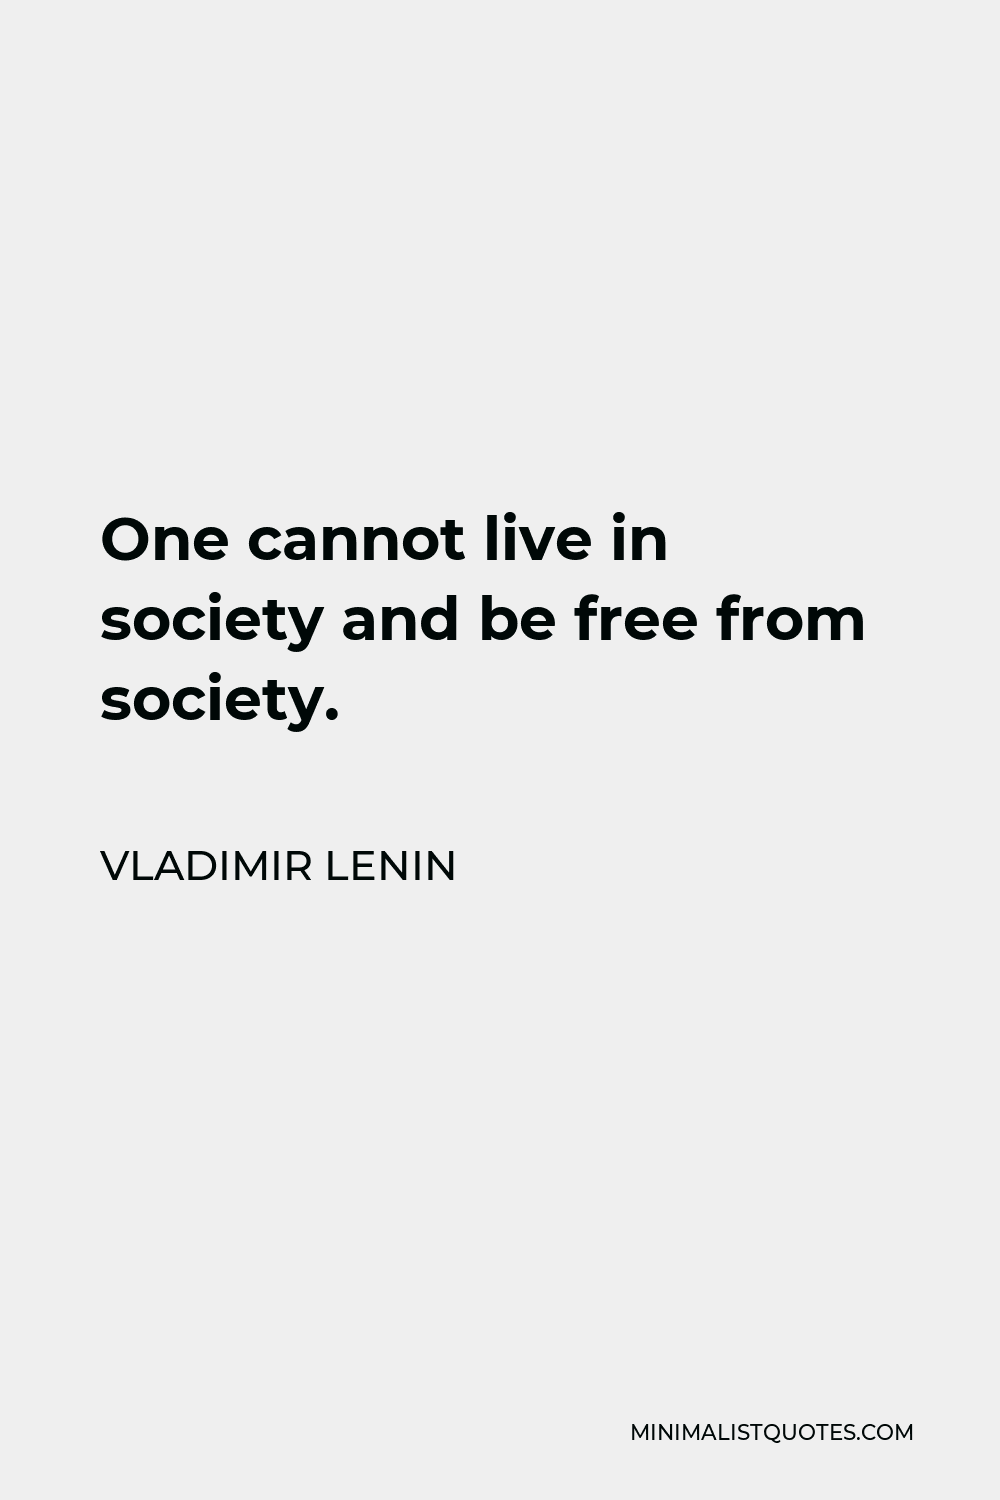 Vladimir Lenin Quote - One cannot live in society and be free from society.